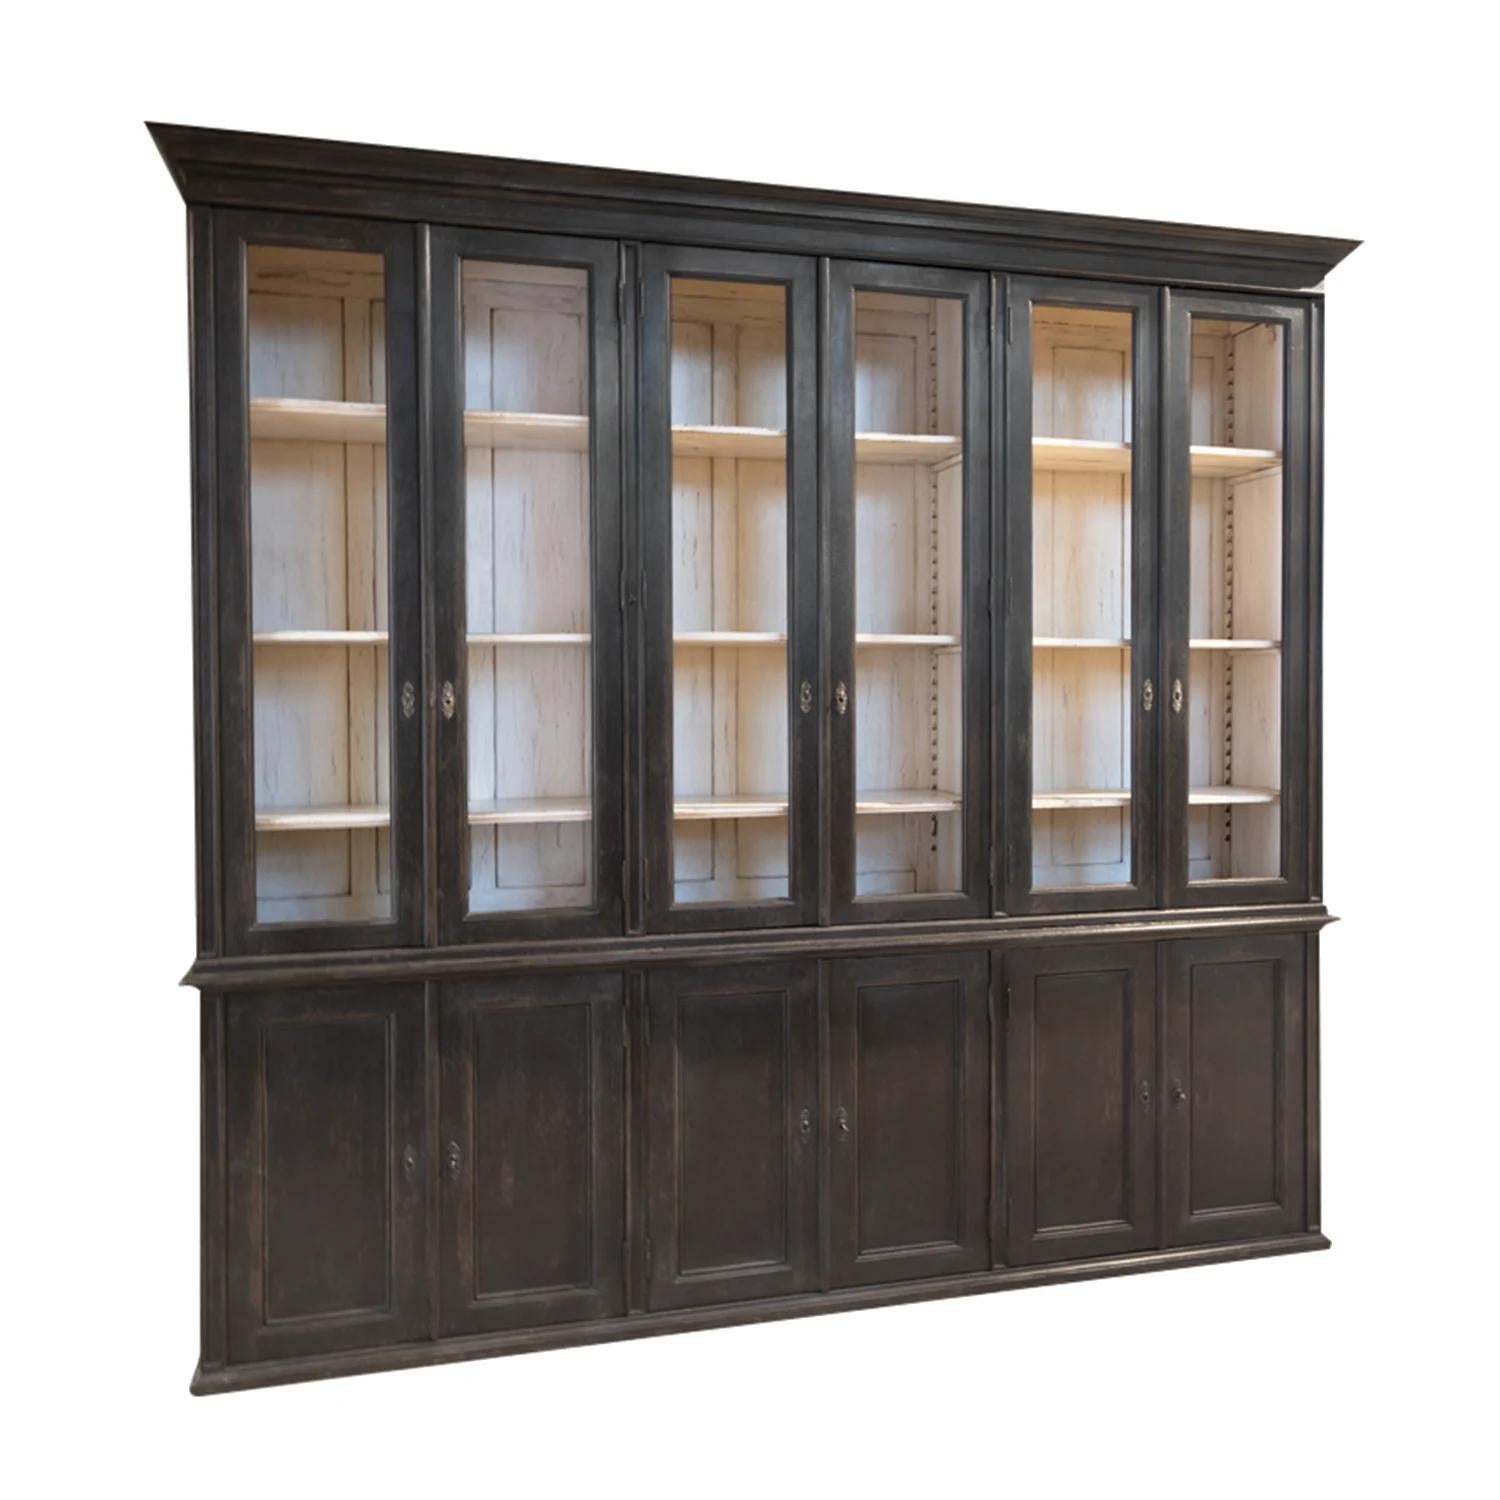 A black, antique French two-part library with six clear glass doors made of hand crafted painted pinewood, in good condition. The upper part of the showcase is detailed with its original brass hardware and keys, the inside consists three adjustable